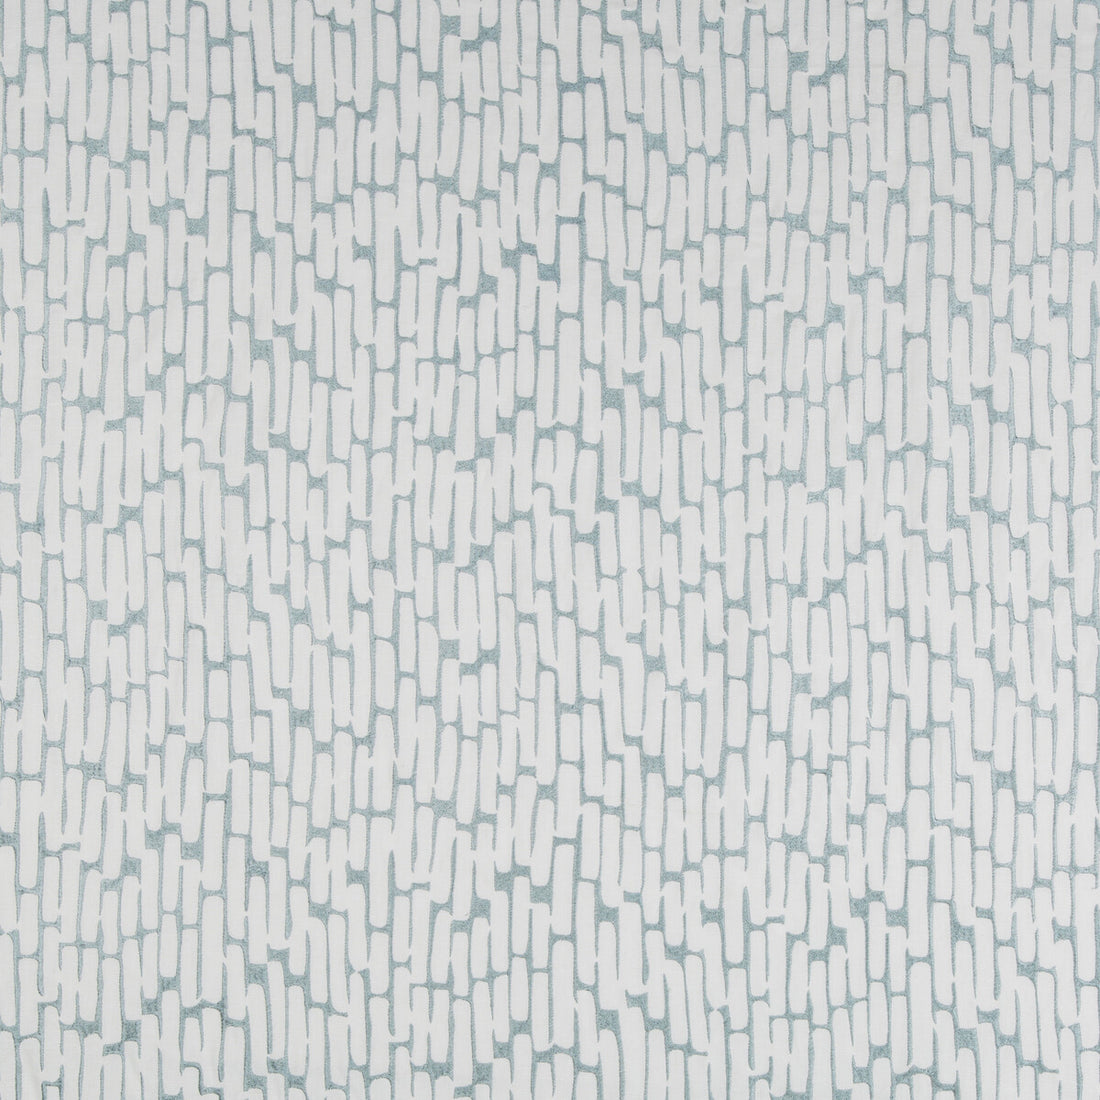 Seahorn fabric in mist color - pattern 4552.15.0 - by Kravet Basics in the Jeffrey Alan Marks Oceanview collection